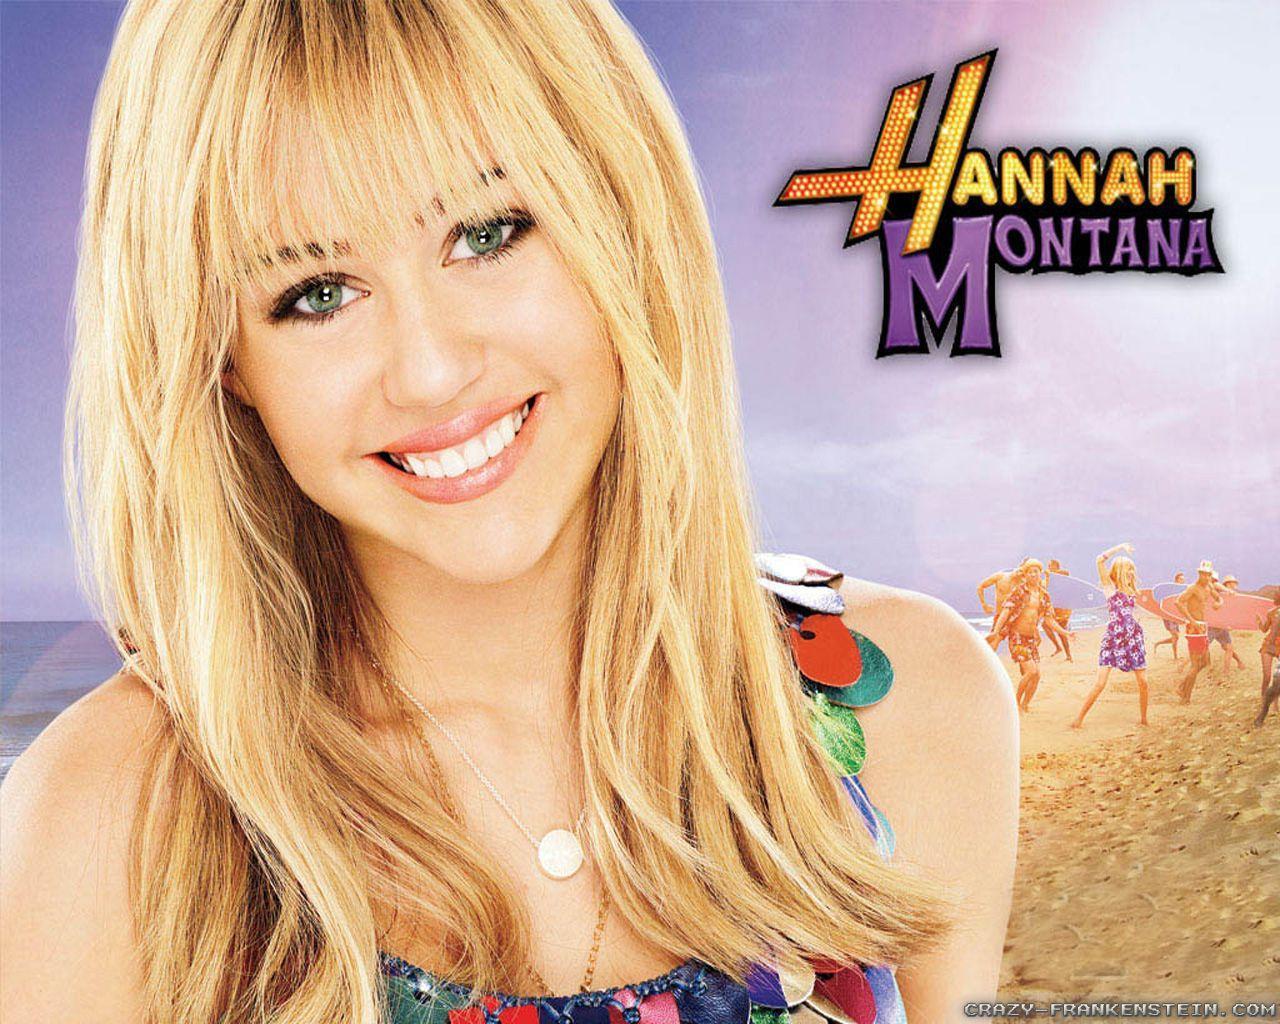 Hannah Montana HD Wallpapers and Backgrounds